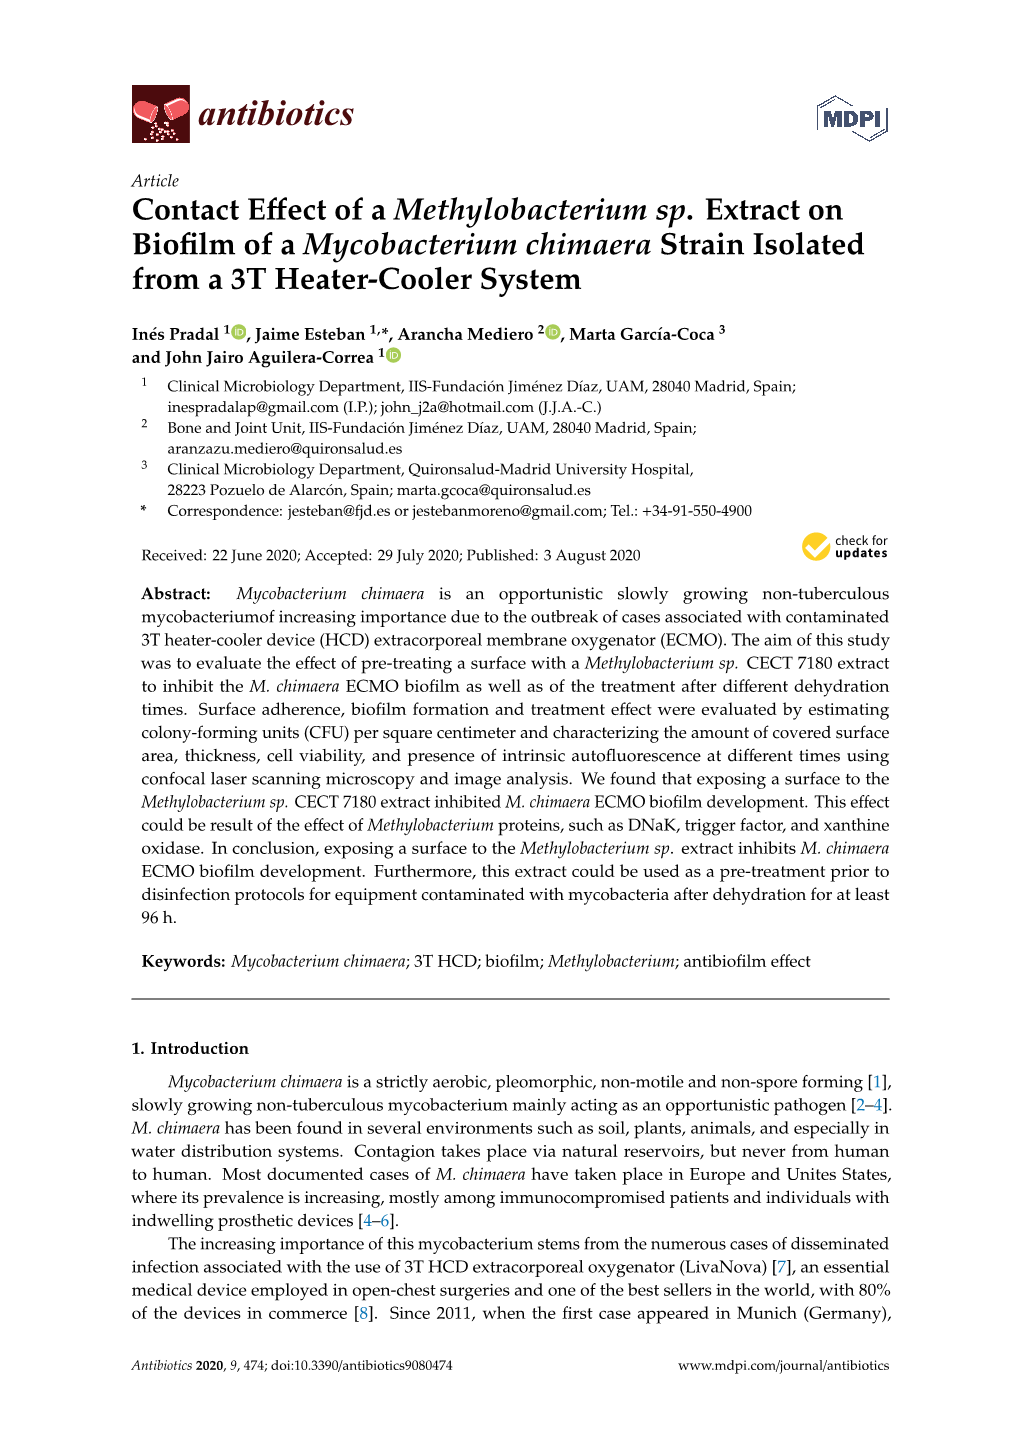 Contact Effect of a Methylobacterium Sp. Extract on Biofilm of A